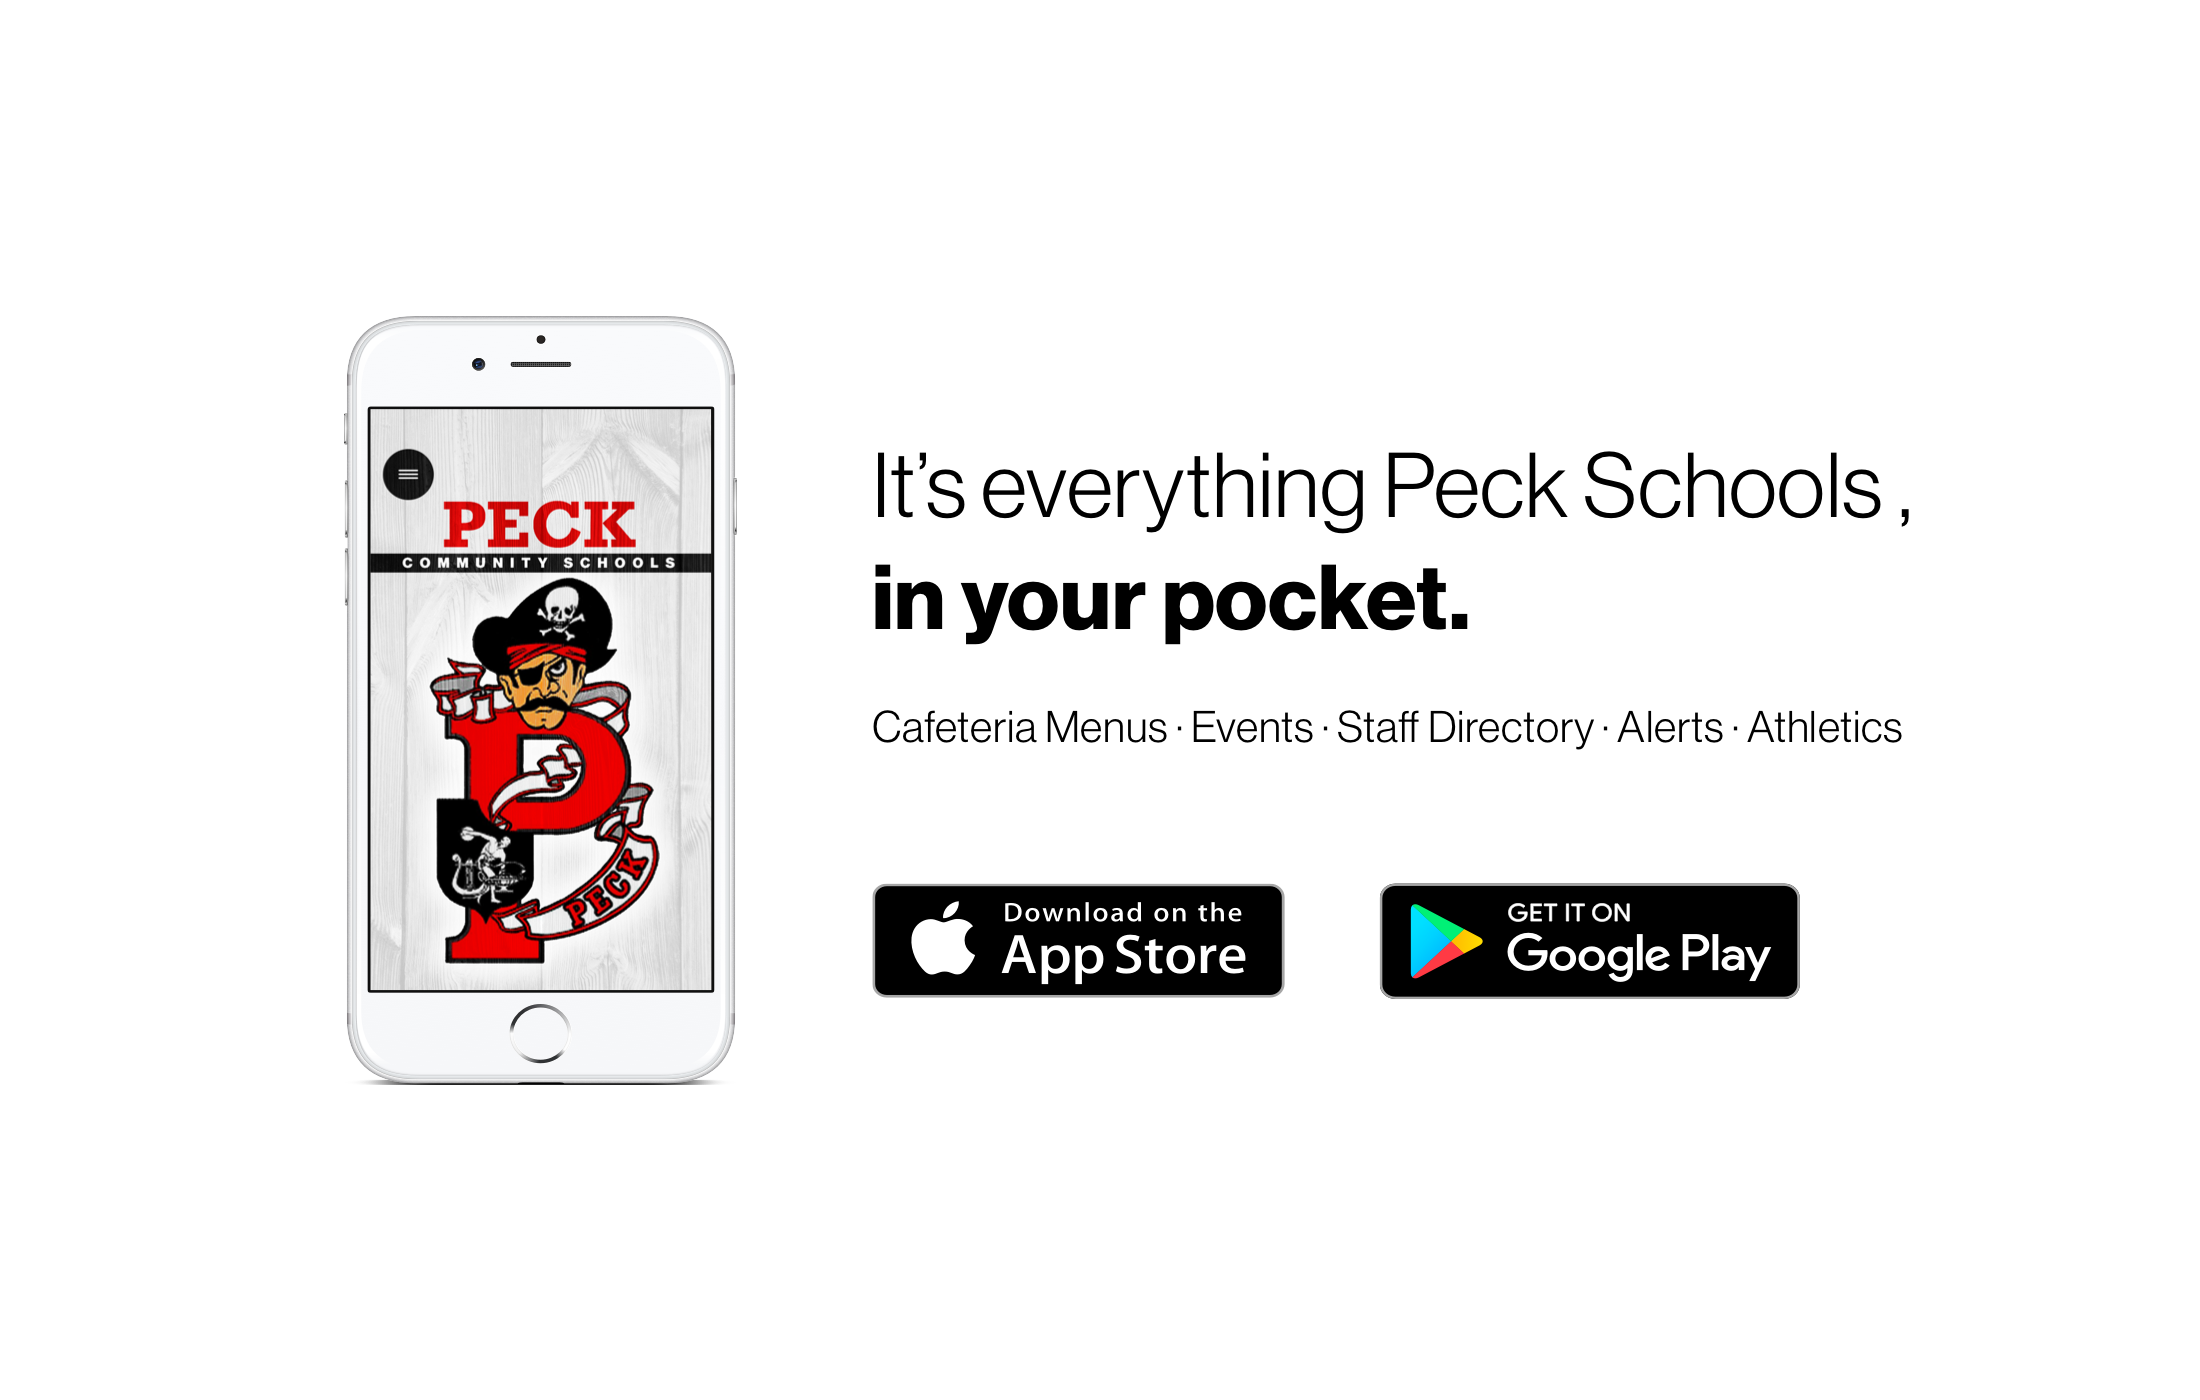 It's everything Peck School, in your pocket. Information about the school app. 